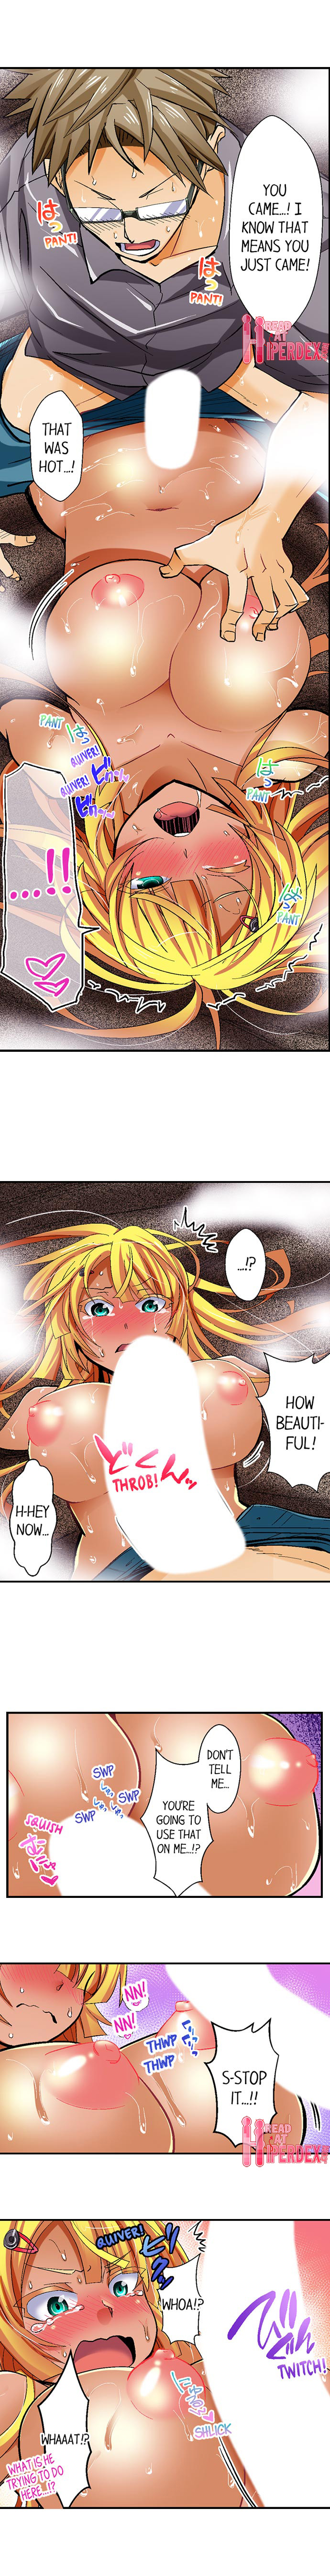 Sex With a Tanned Girl in a Bathhouse - Chapter 3 Page 4